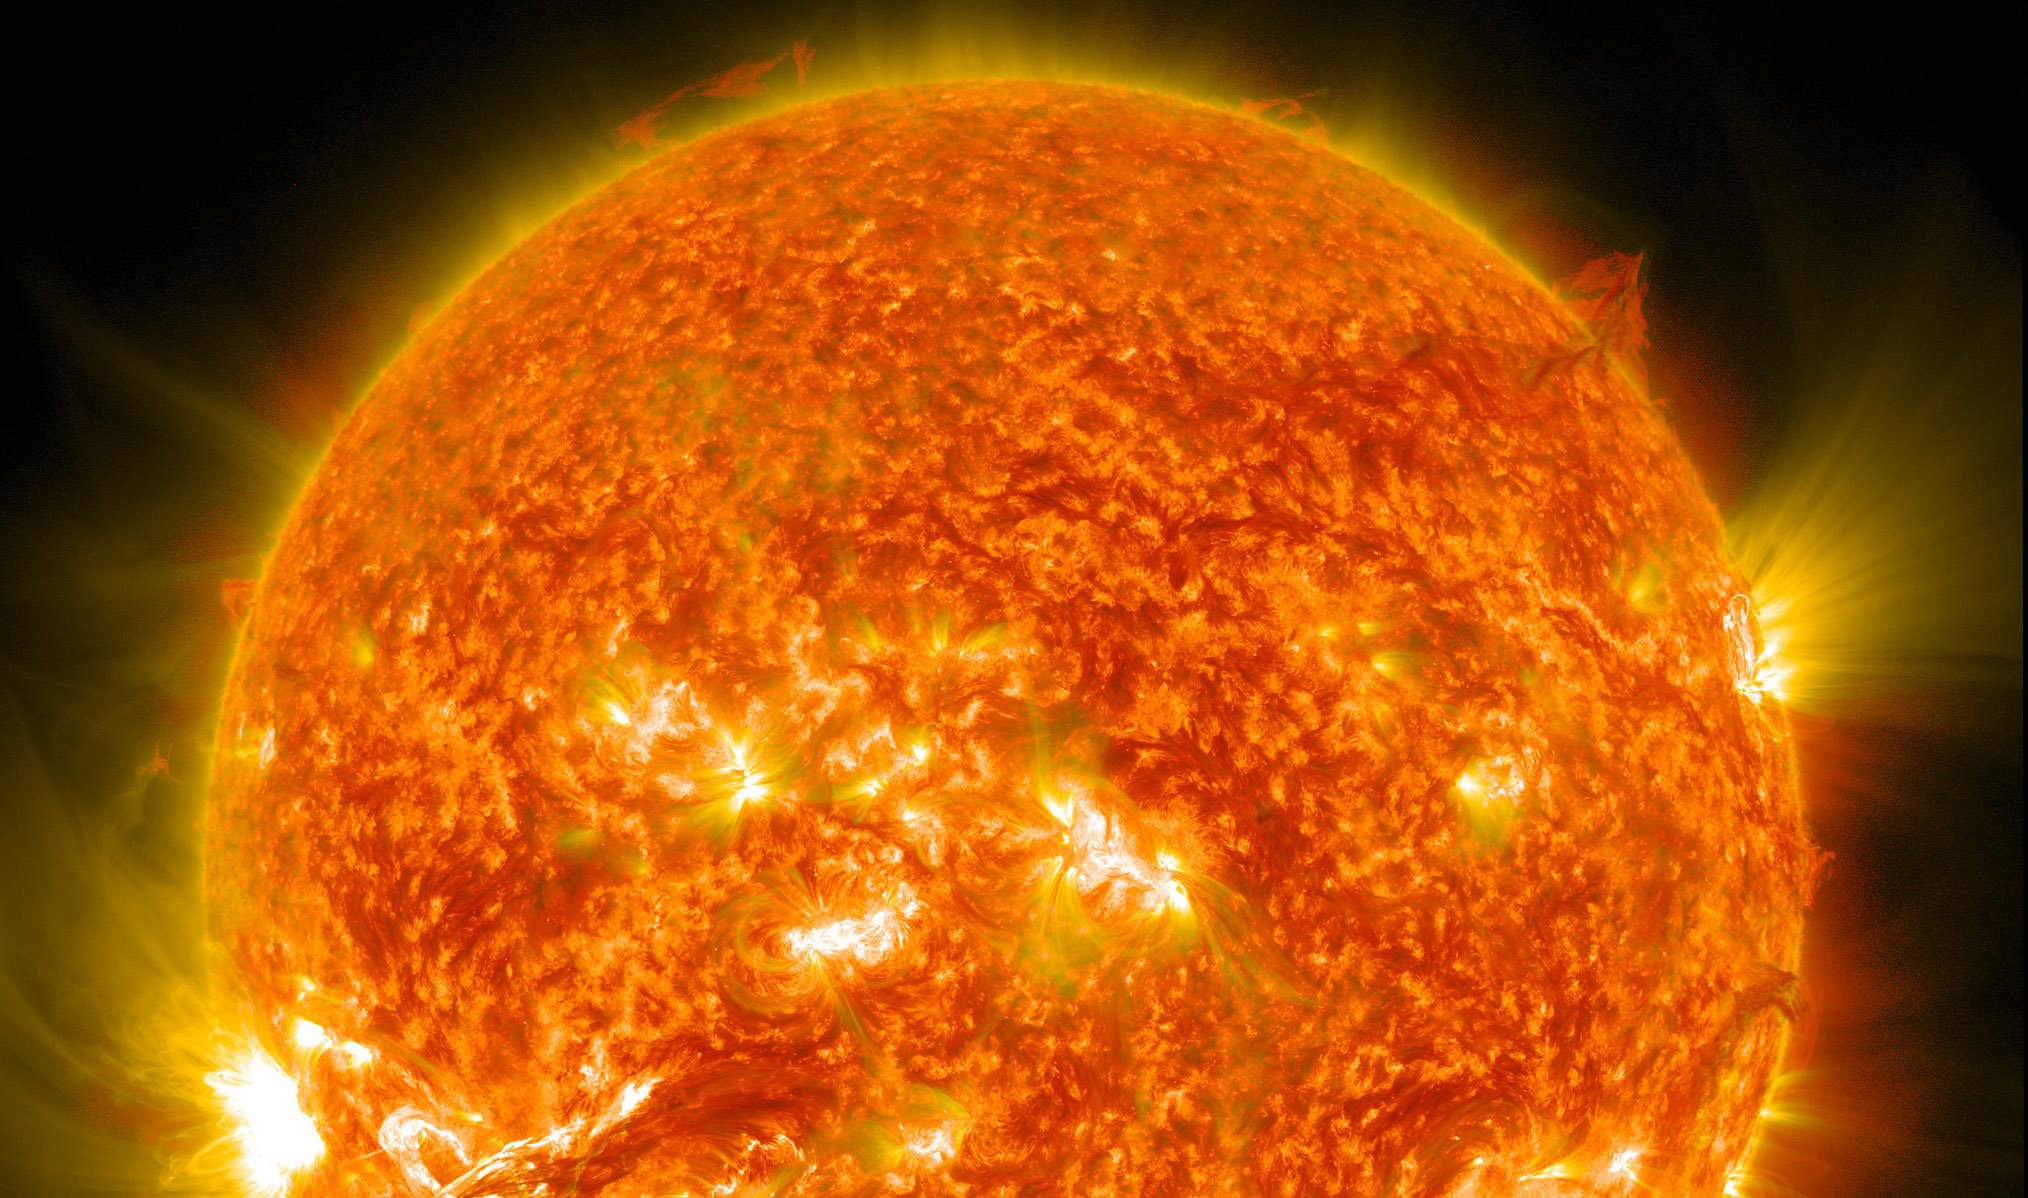 At the outermost edges of the sun's atmosphere the temperature rises to several million degrees Celsuis.